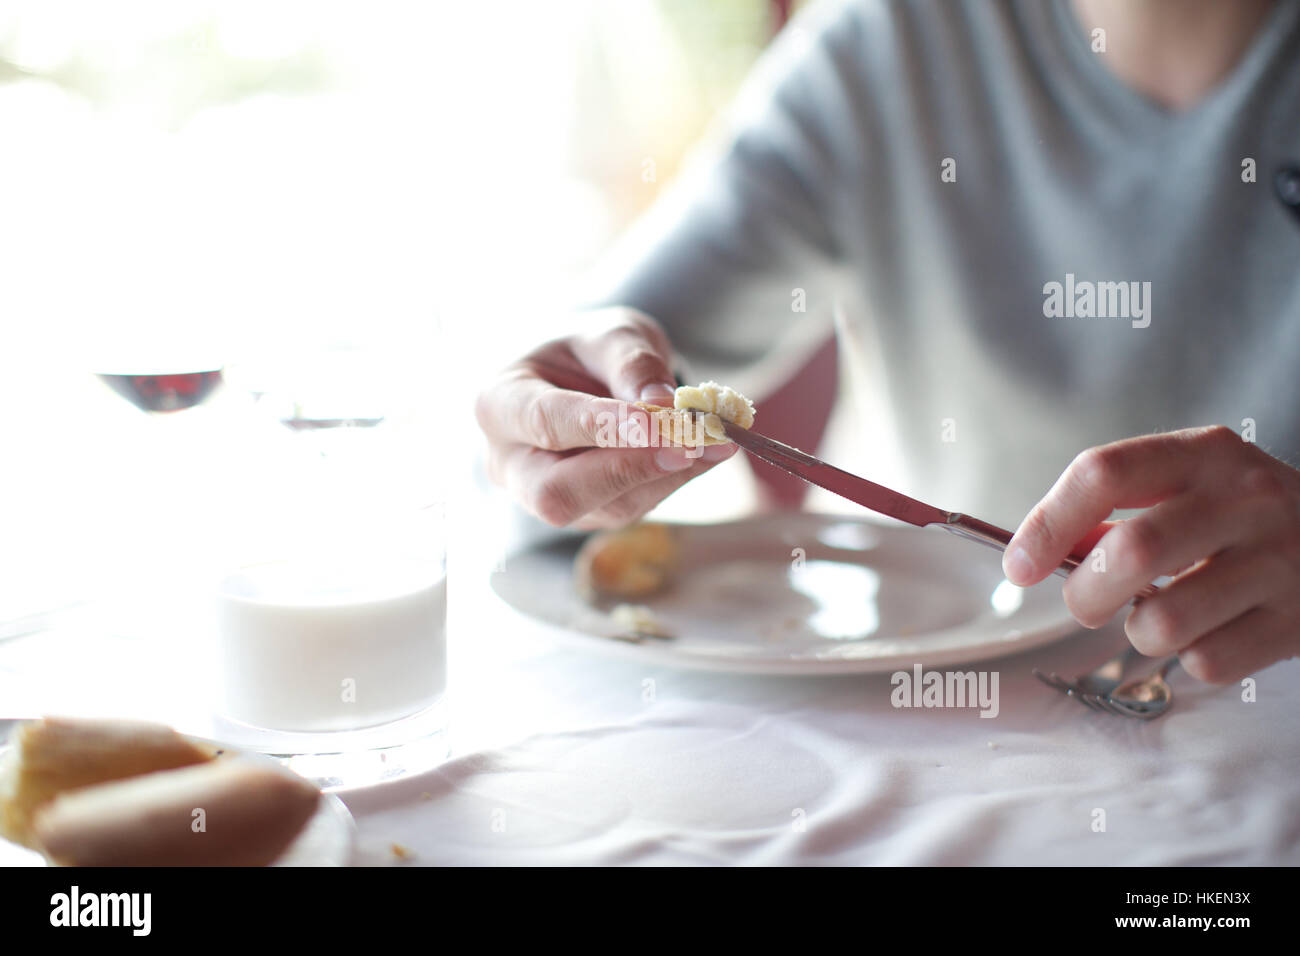 man eating food at restaurant table. bread, hands, plate, food drinks. Stock Photo